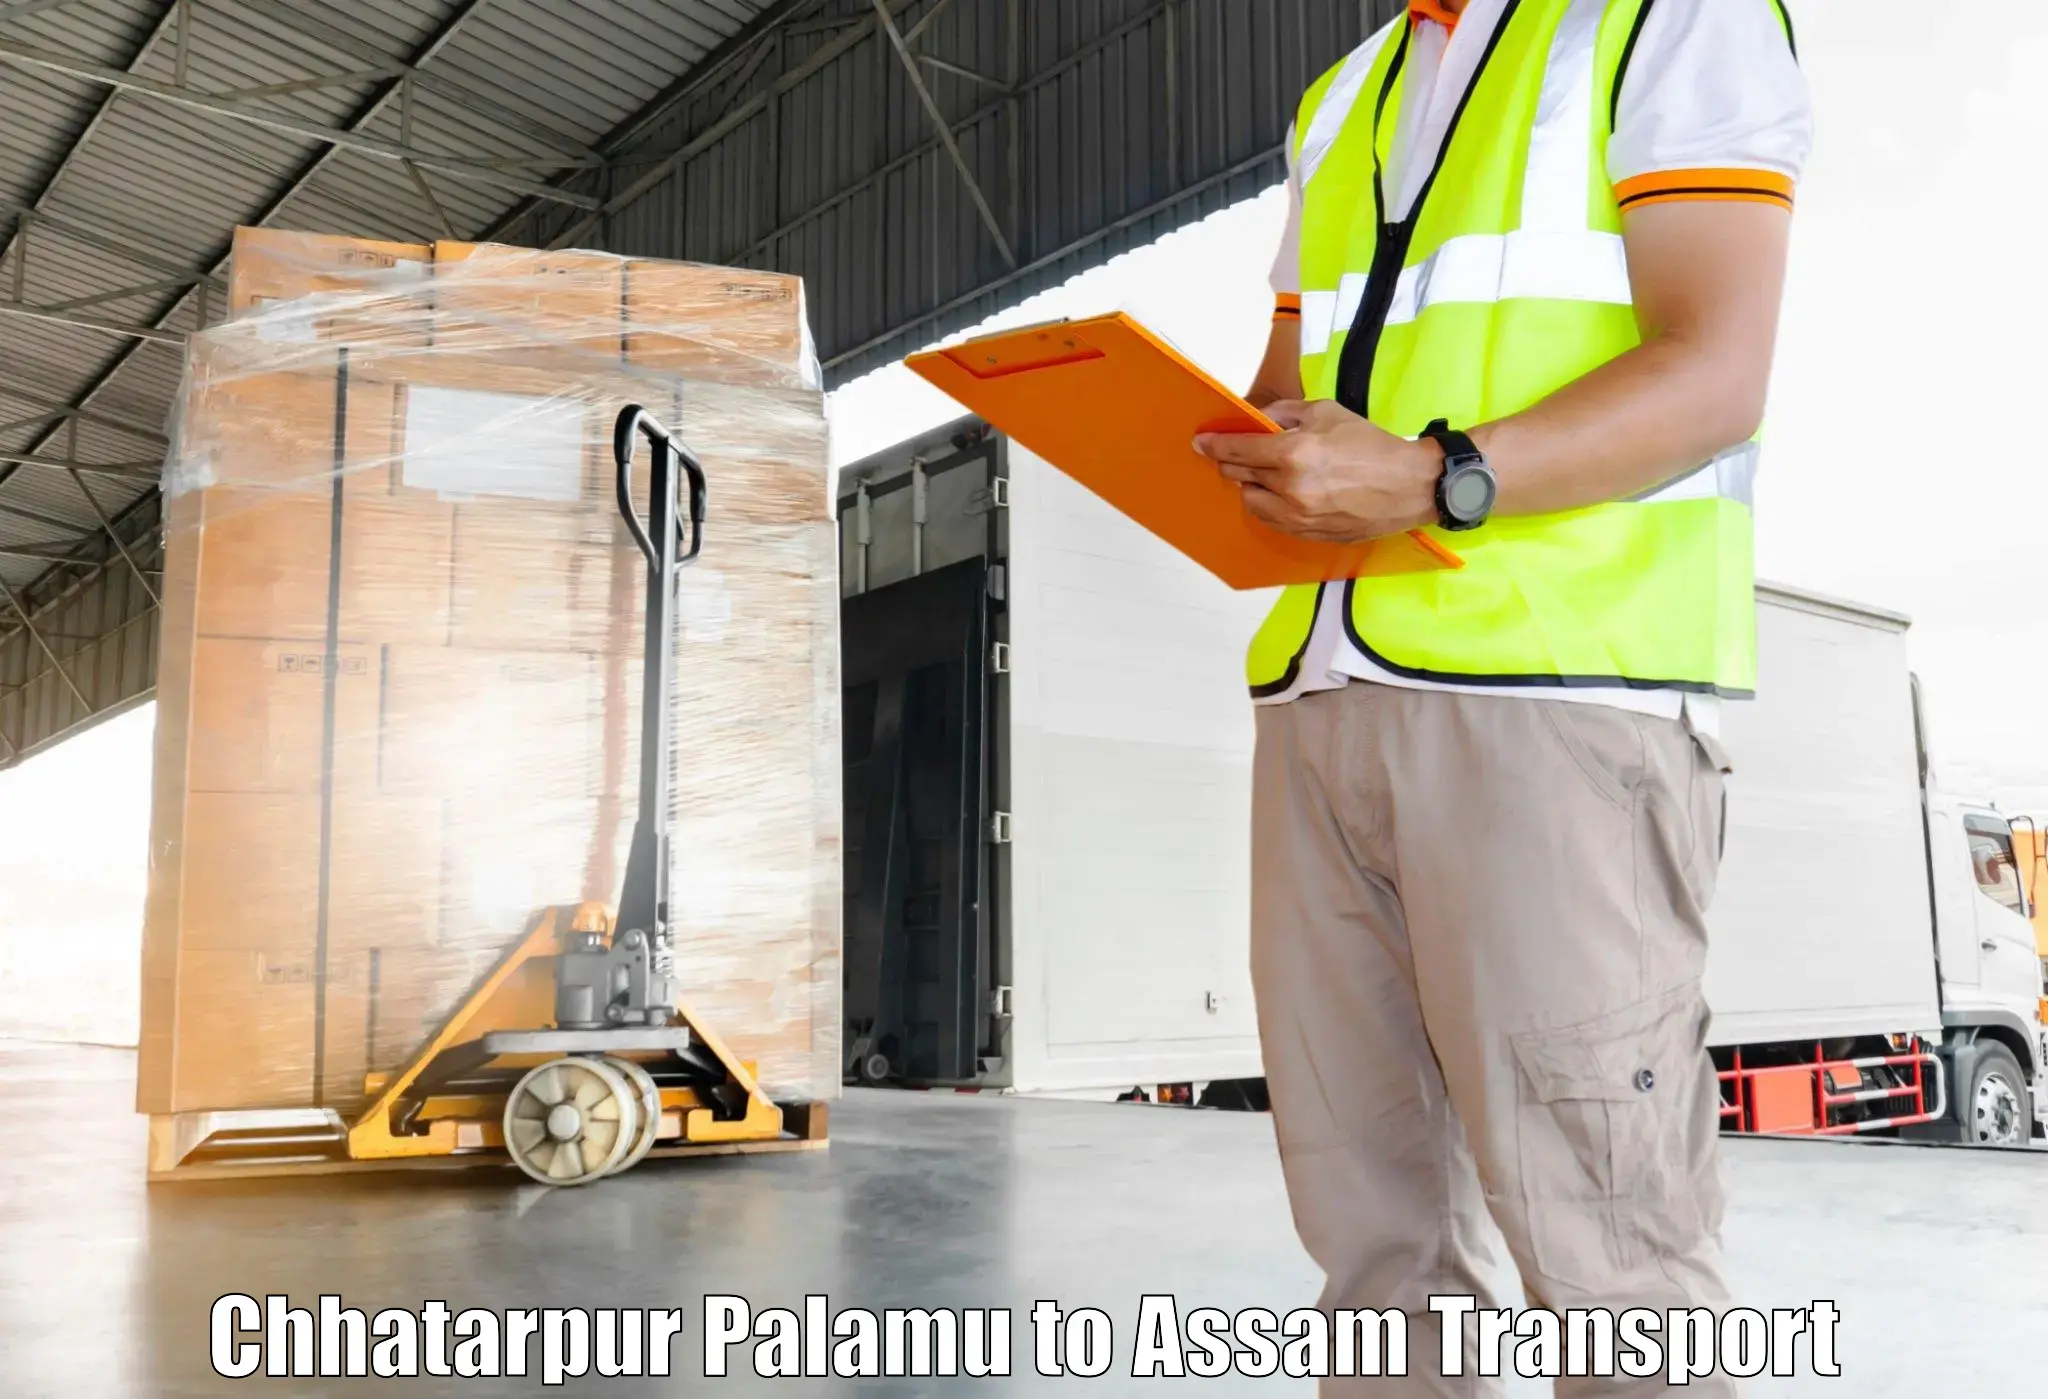 Scooty transport charges in Chhatarpur Palamu to Assam University Silchar